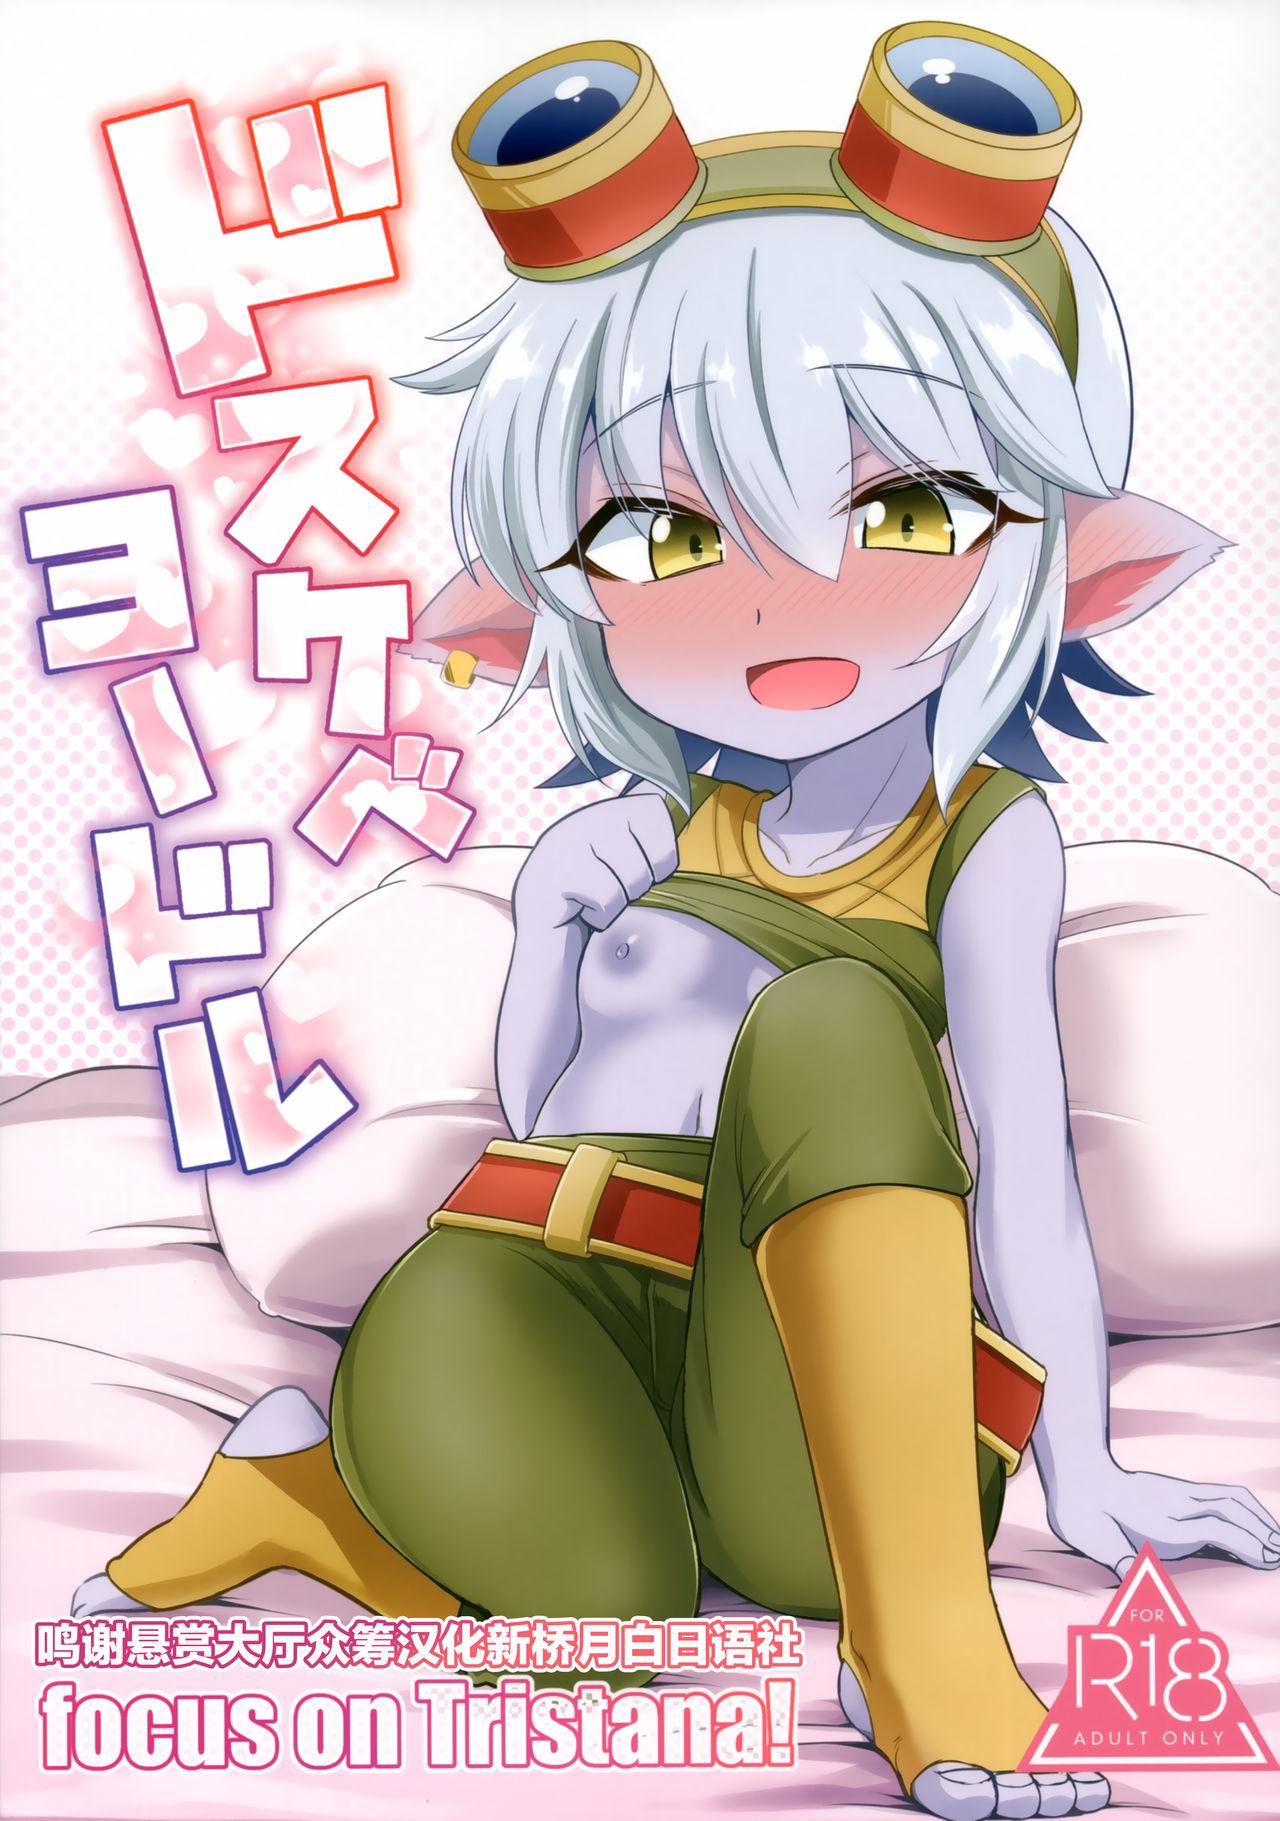 Lovers Dosukebe Yodle focus on tristana! - League of legends Plumper - Picture 1